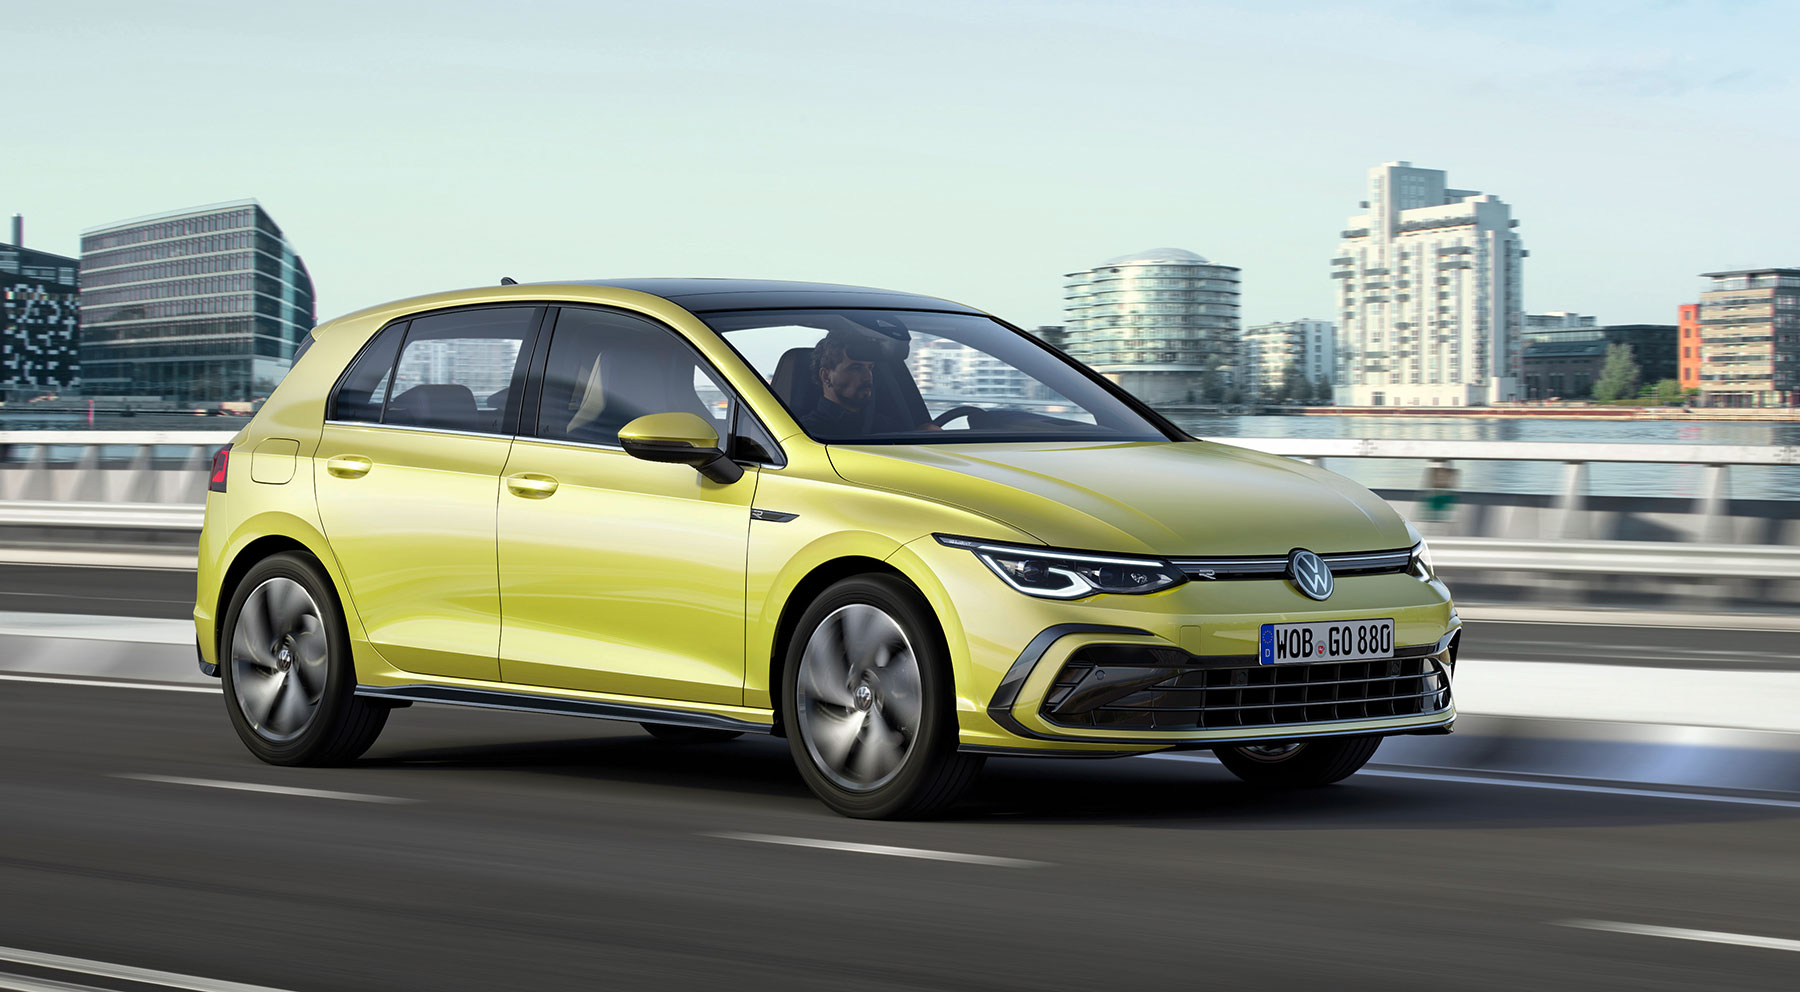 All-new 2020 Volkswagen Golf unveiled